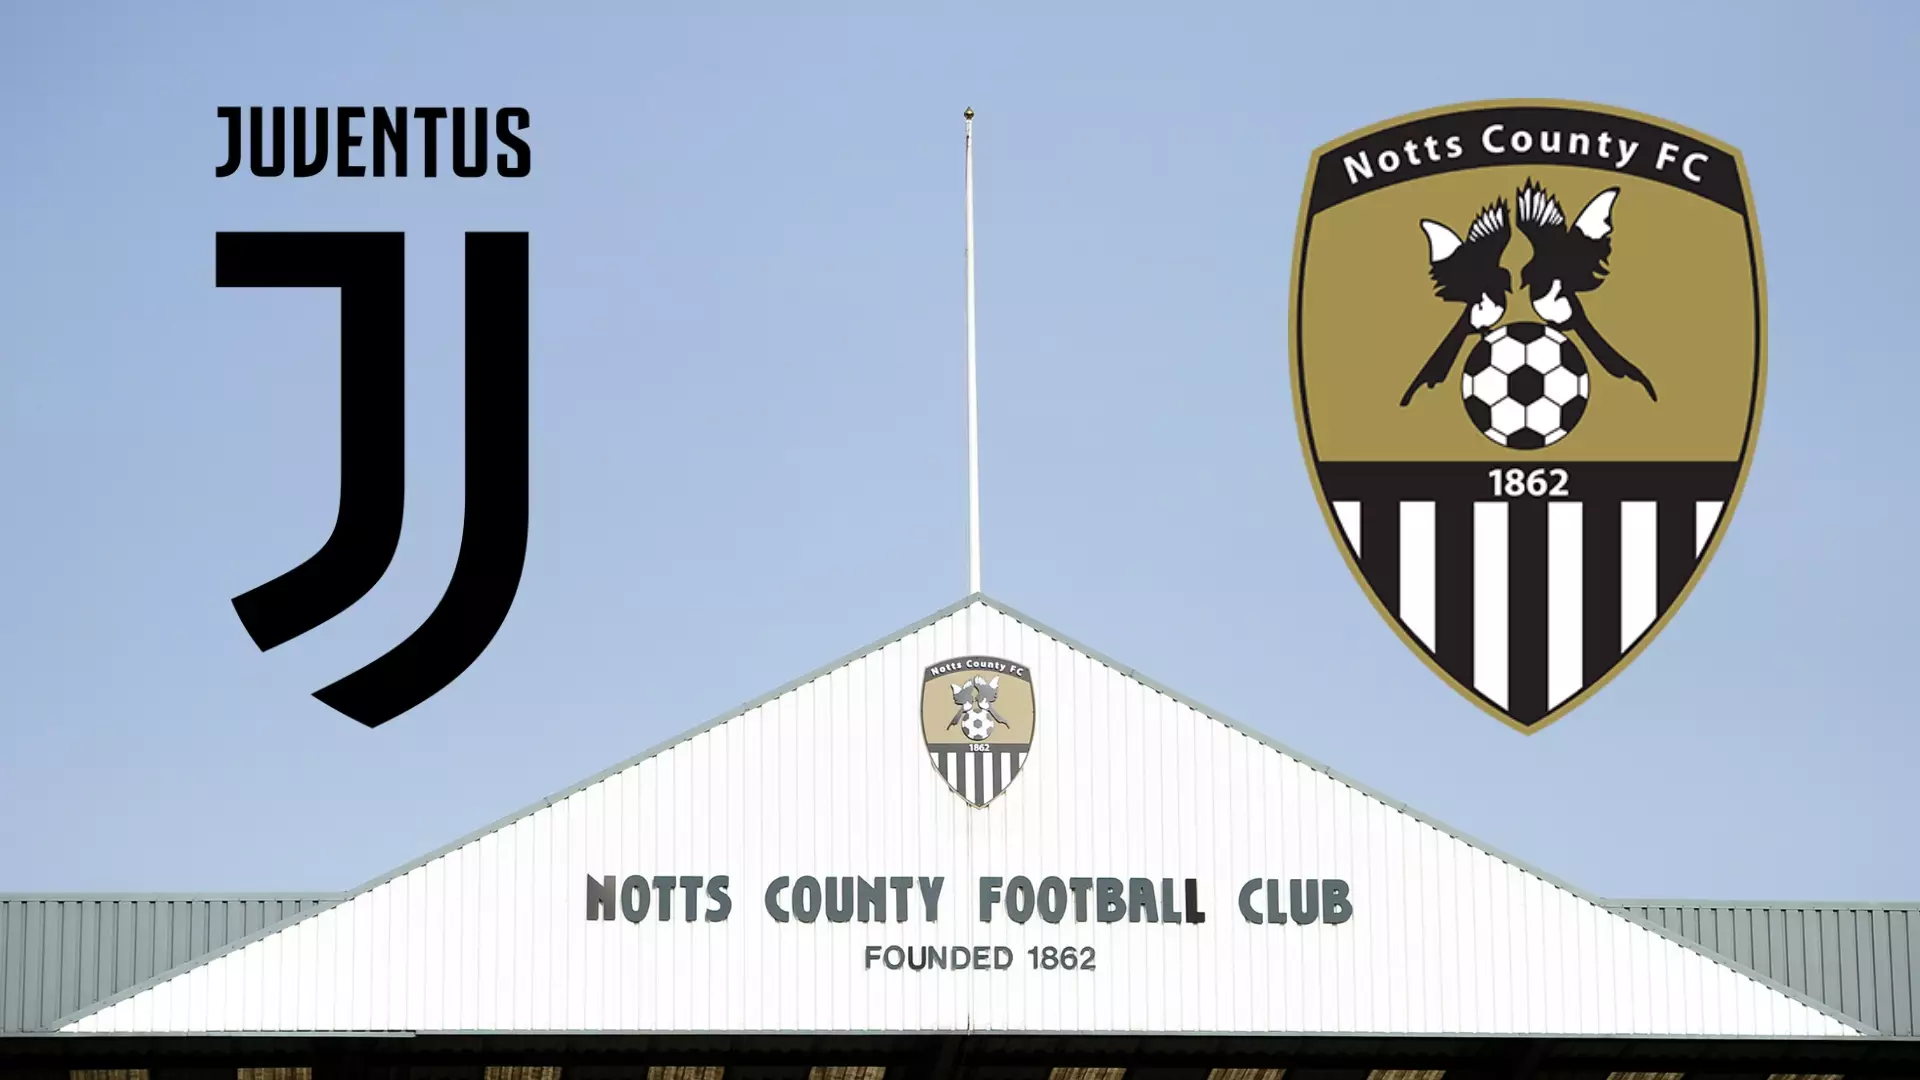 Notts County To Make Fresh Plea For Juventus To Help Repay A 116-Year-Old Favour